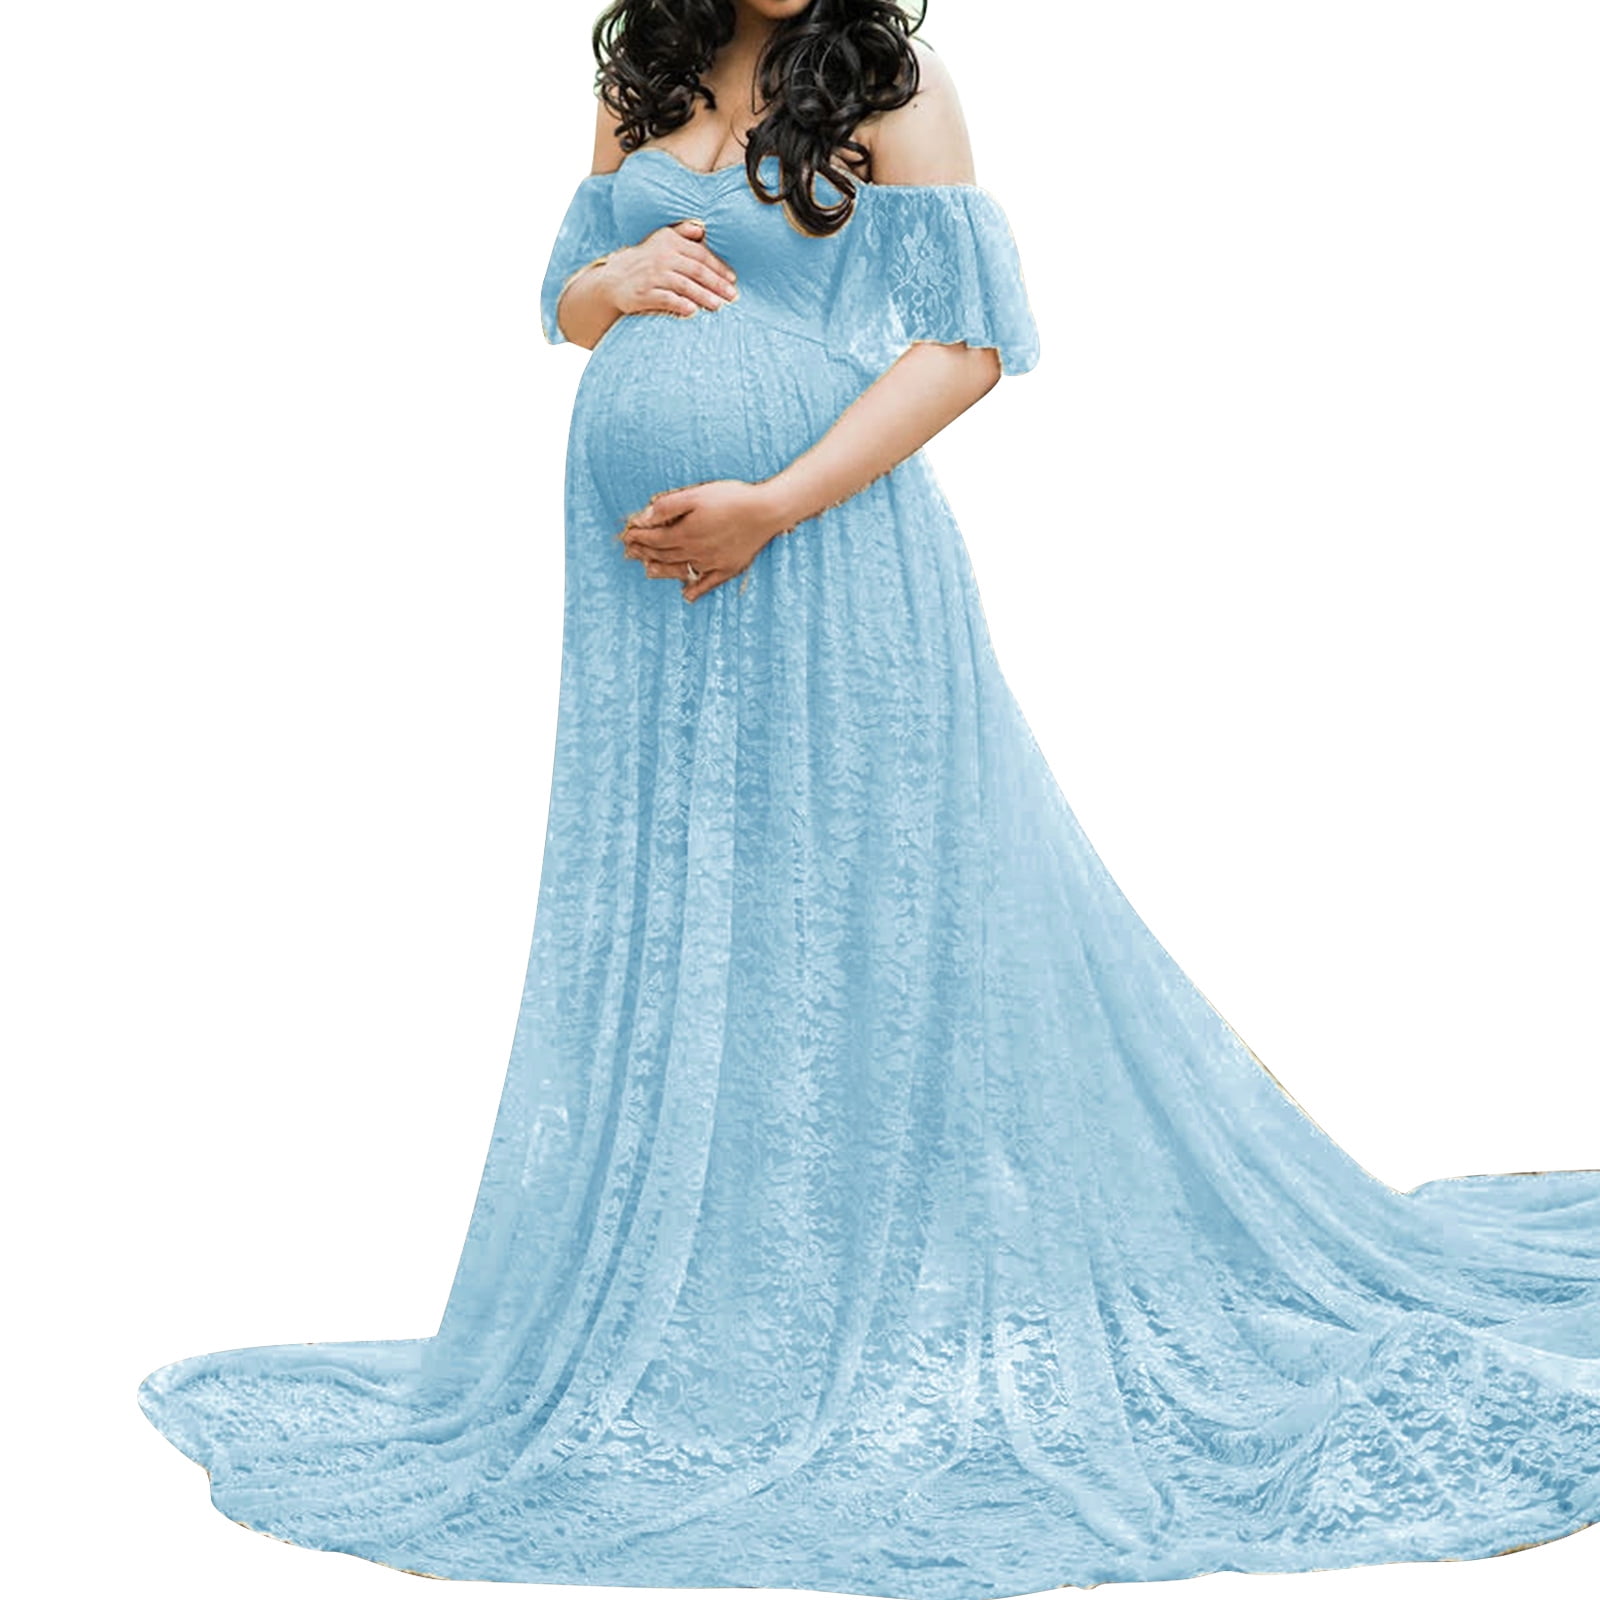 Womens Lace Off-Shoulder Maternity Dress Lace Fancy Pregnancy Gown for ...